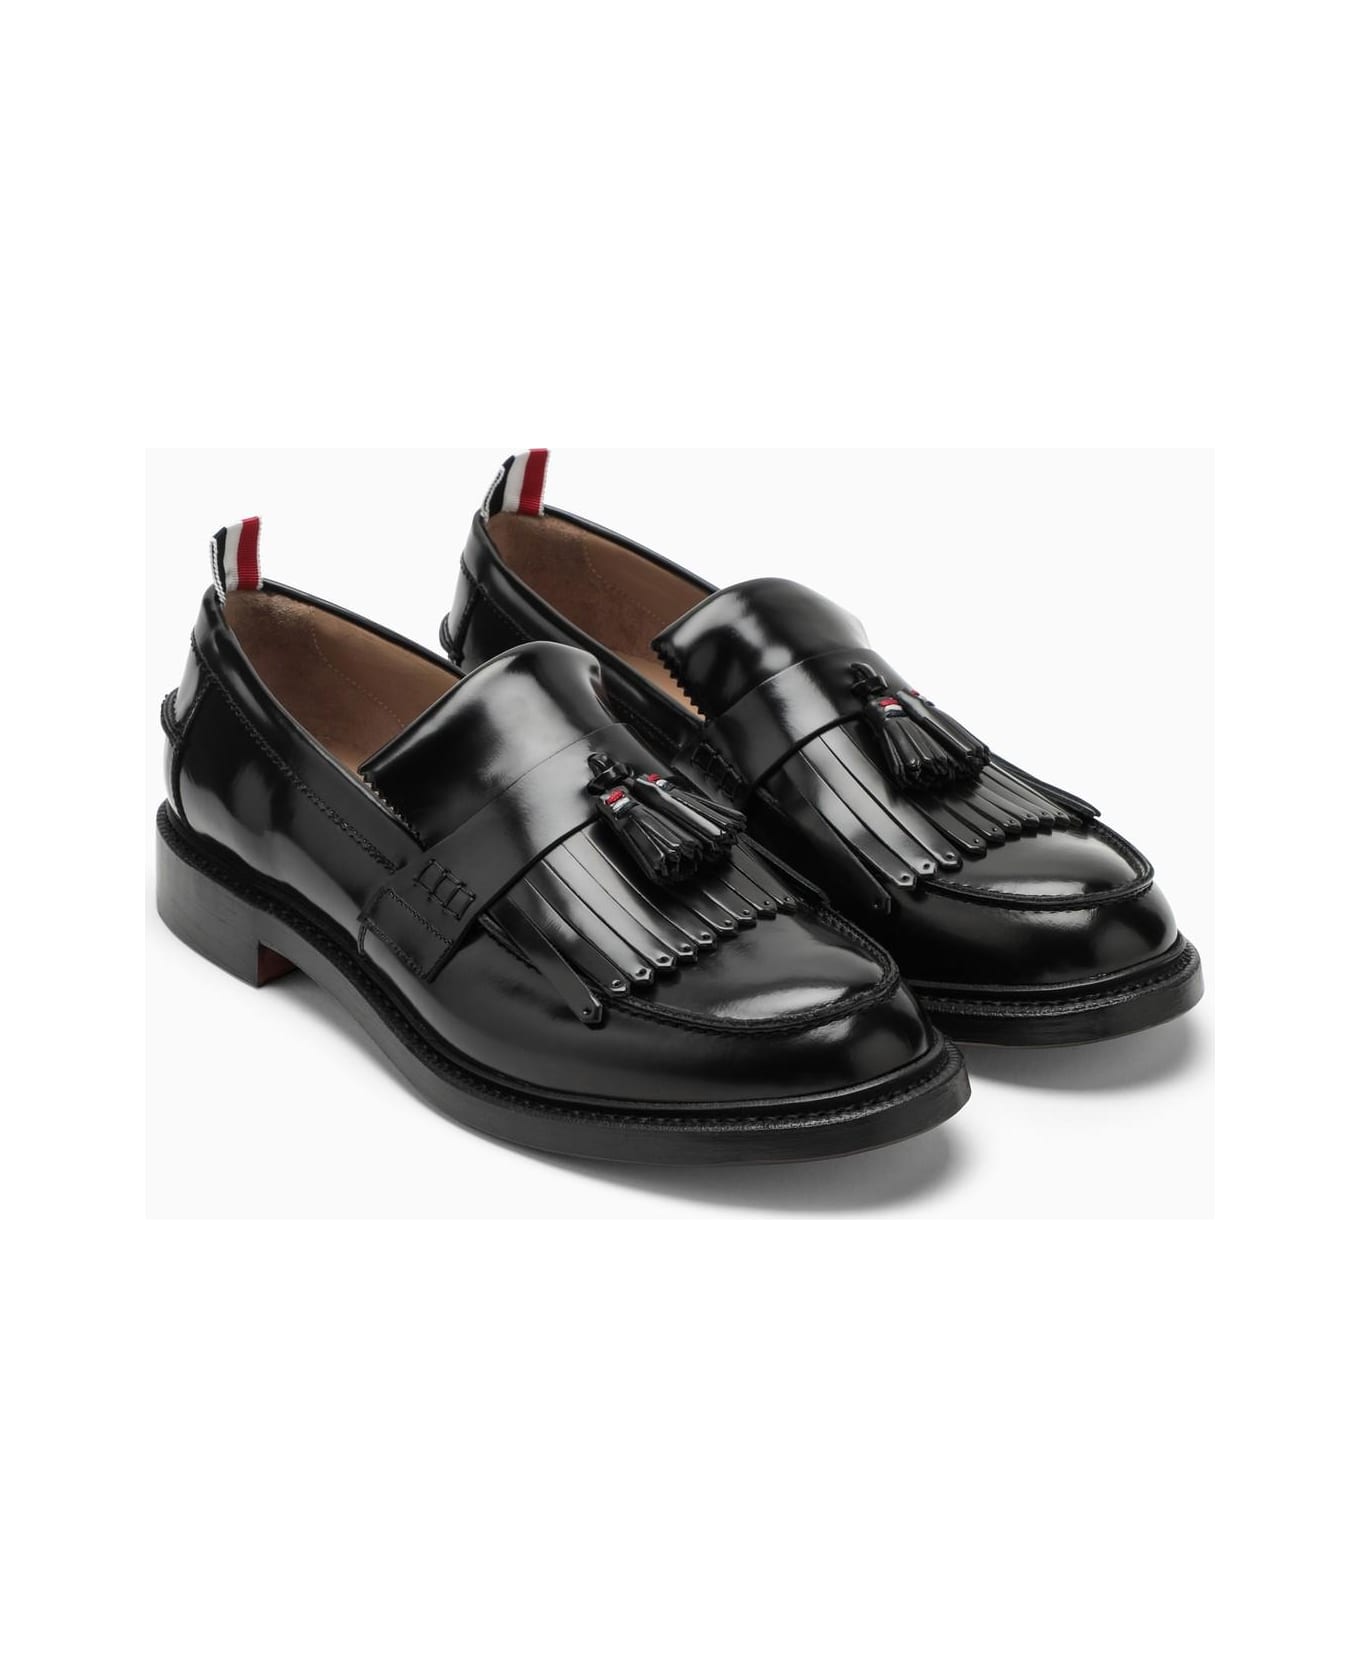 Thom Browne Black Leather Moccasin With Tassels - BLACK